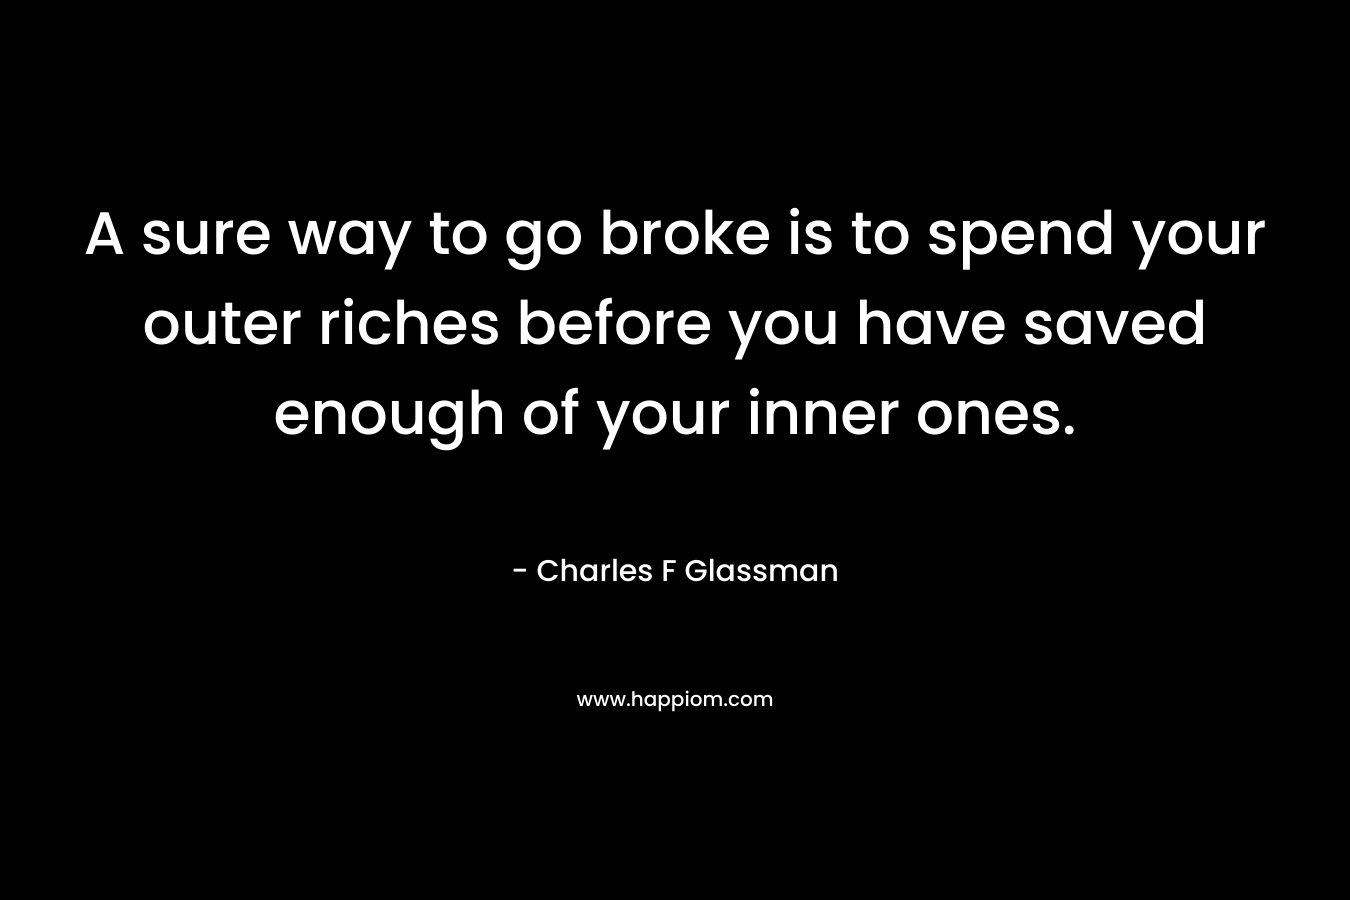 A sure way to go broke is to spend your outer riches before you have saved enough of your inner ones.